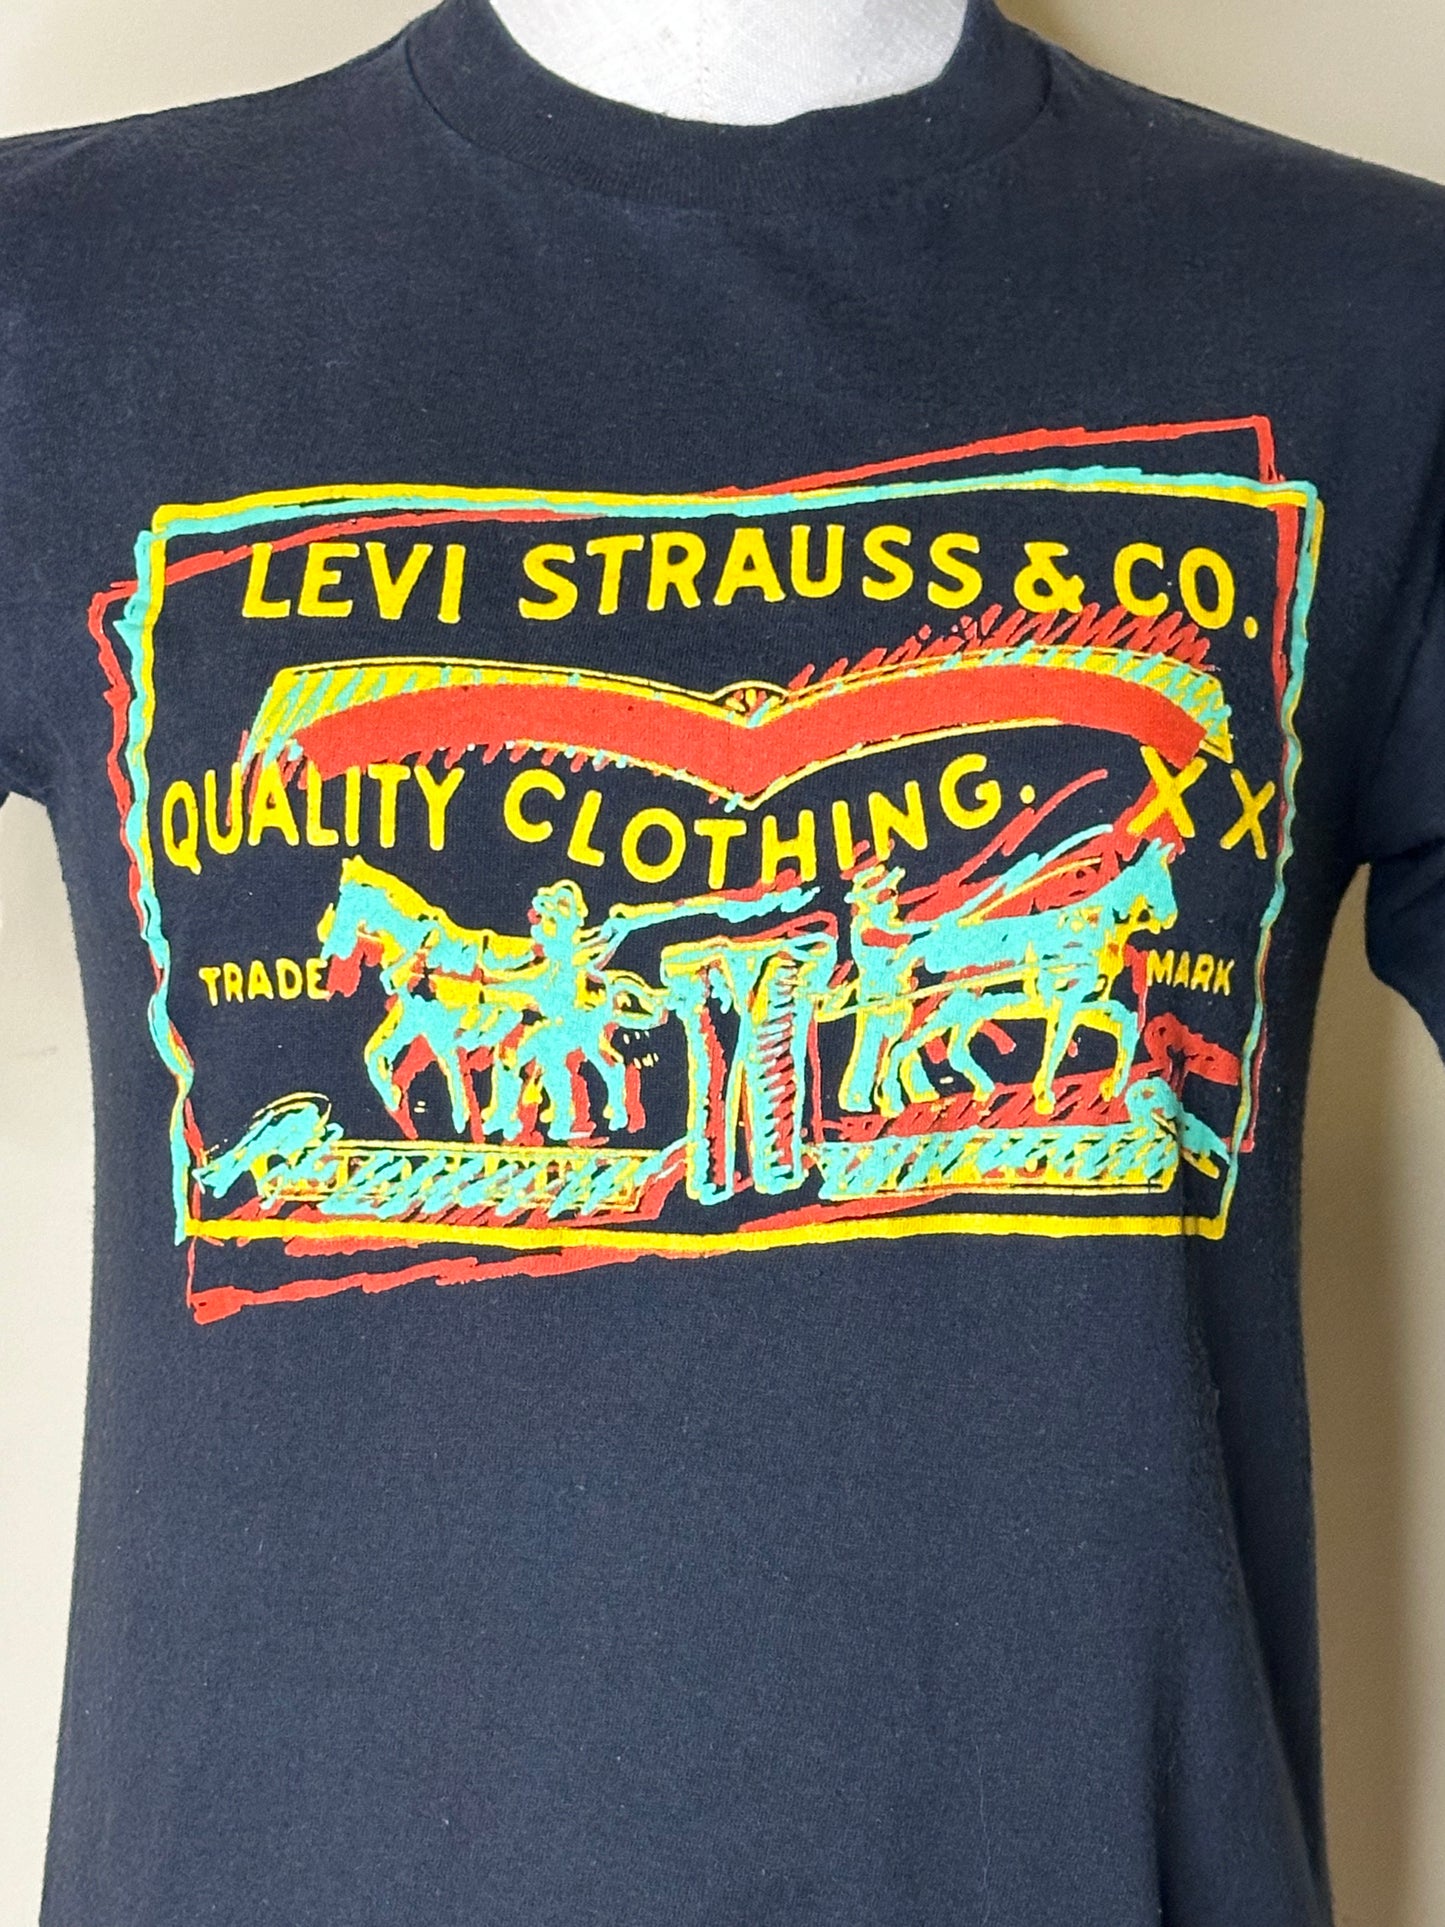 Vintage 80’s Levi Strauss & Co. T-Shirt S